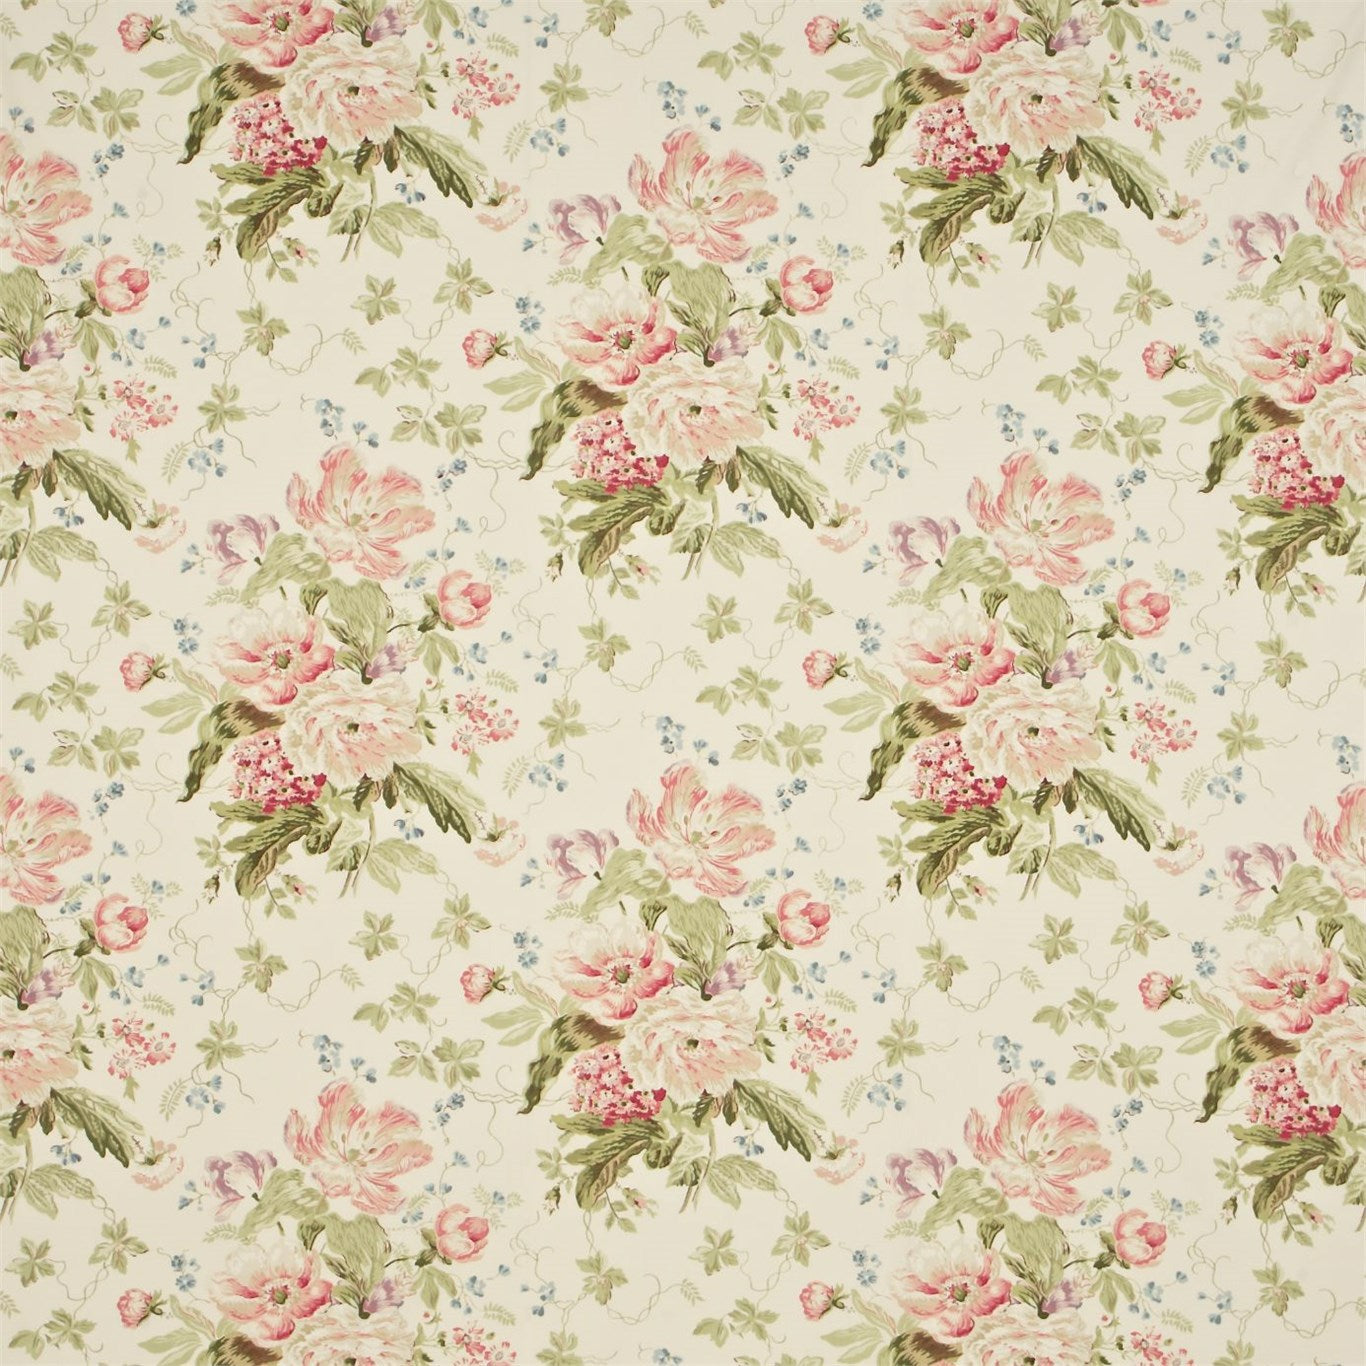 Alsace Fabric by Sanderson - DAUP224450 - Cream/Rose